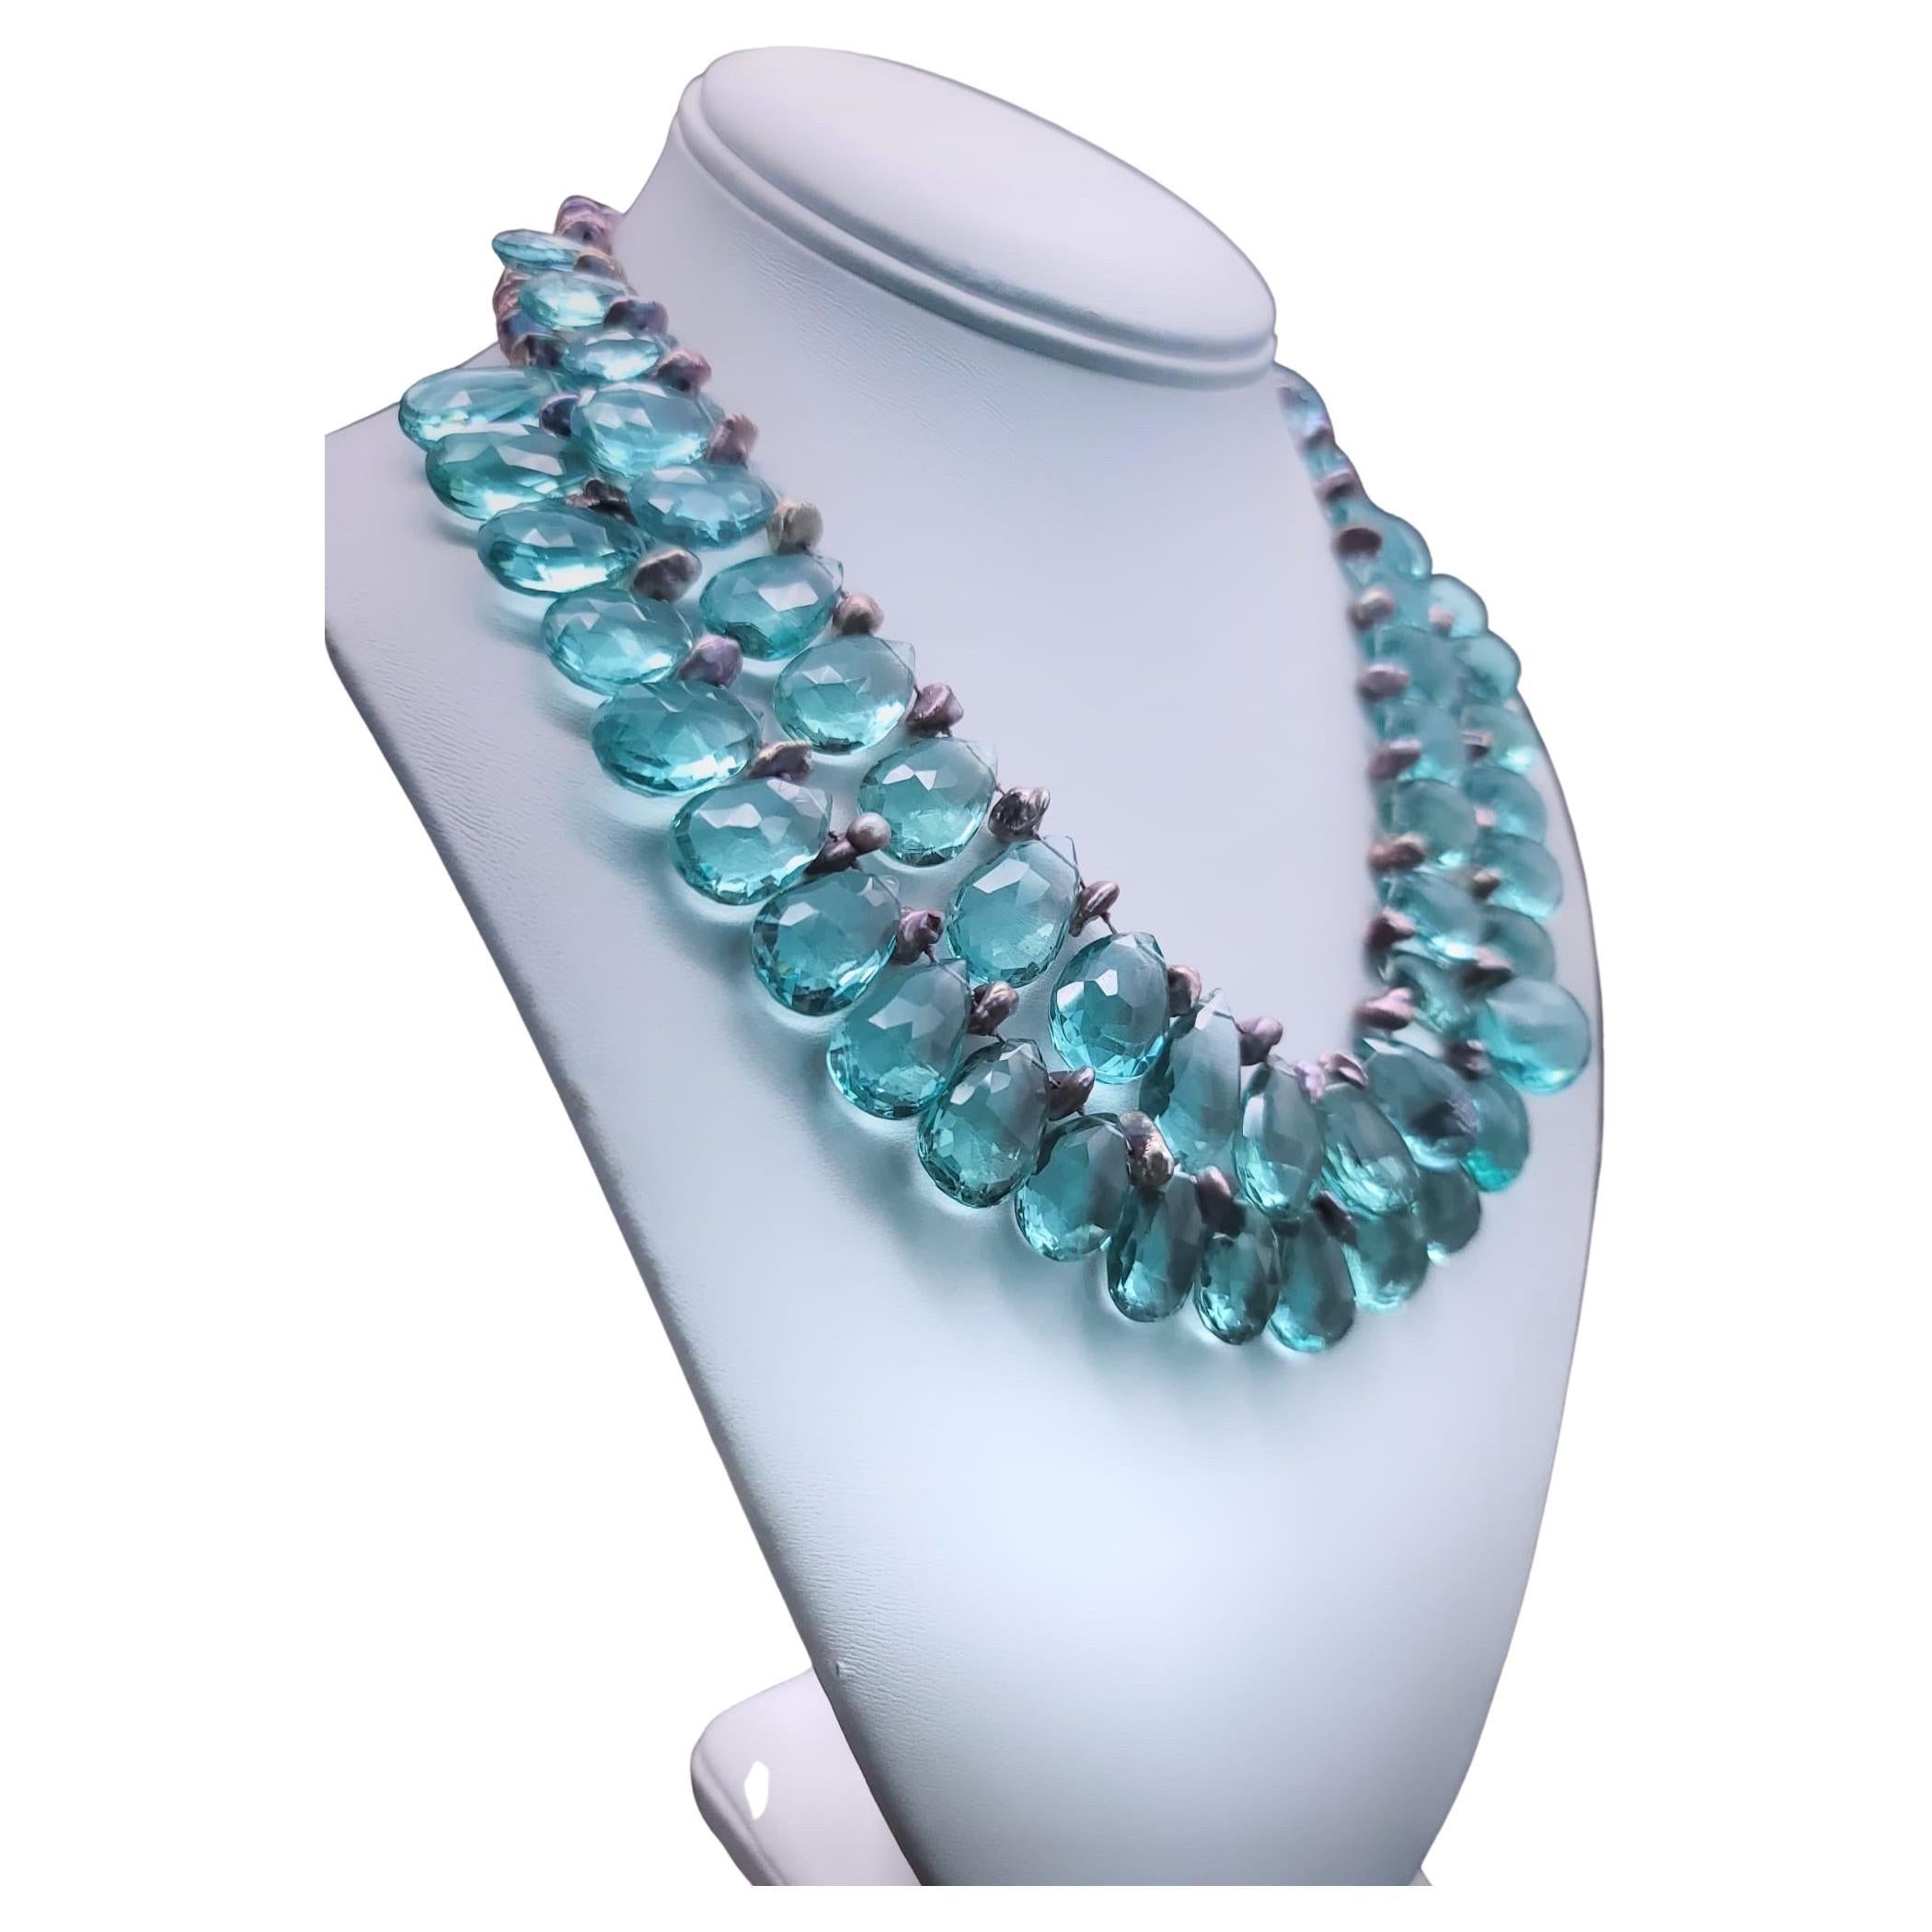 One-of-a-Kind

Romantic 2-strand hand-knotted Blue Quartz necklace. The richly colored, faceted, teardrop Quartz is accented by equally rich colored pinky/ bronze small baroque pearls. The clasp is fashioned from a vintage cuff link intaglio horse